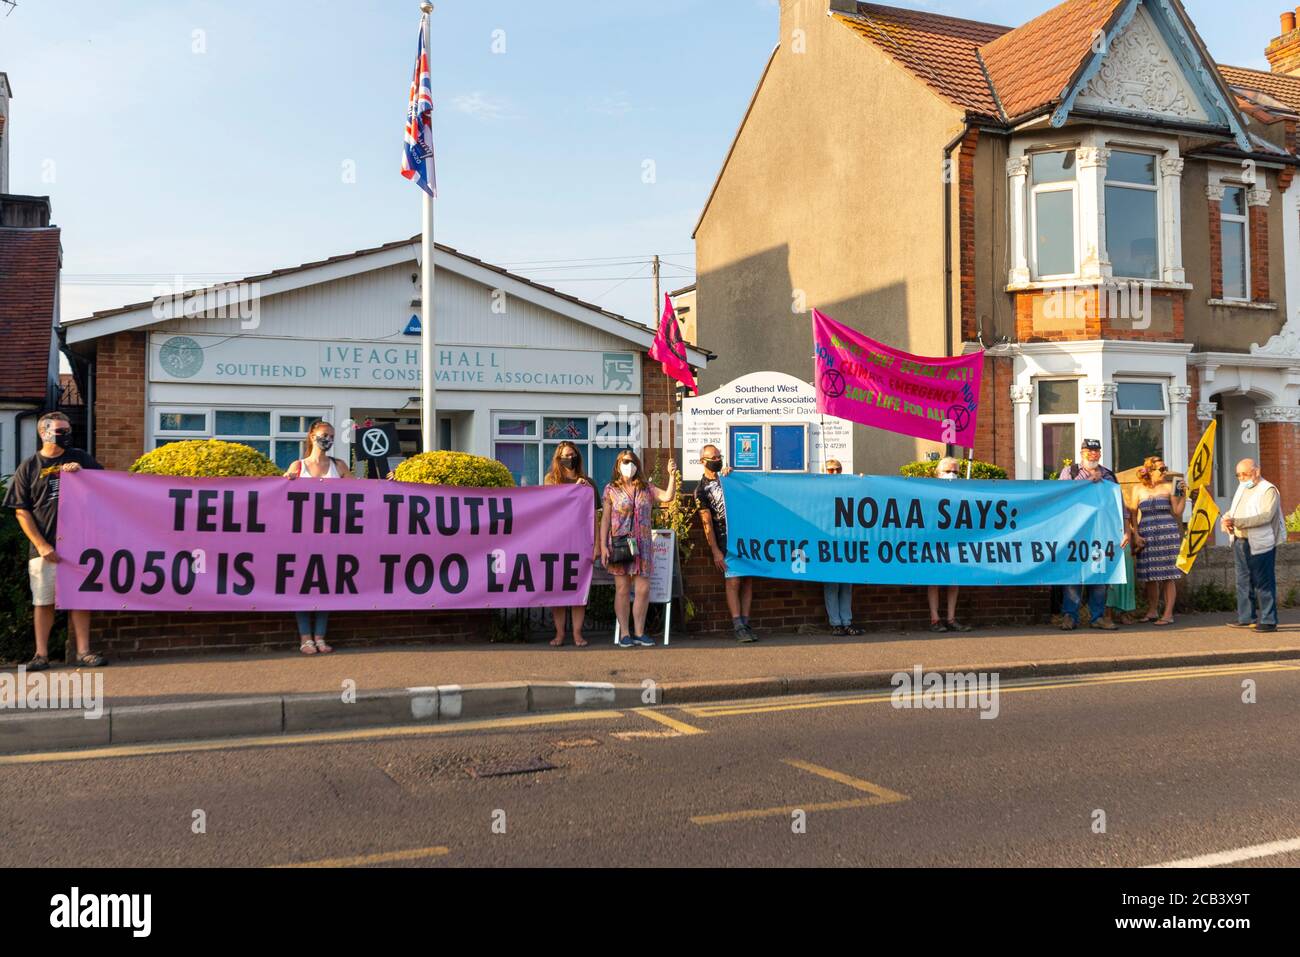 Leigh Road, Leigh on Sea, Essex, UK. 10th Aug, 2020. The Southend branch of Extinction Rebellion held a protest outside the Iveagh Hall constituency office of David Amess, Conservative MP for Southend West. The climate change protesters held a banner stating 'Tell the Truth' in relation to the UK's target of reaching net zero emissions by 2050, which they believe is too late. NOAA have forecast a blue ocean event of melting arctic ice Stock Photo